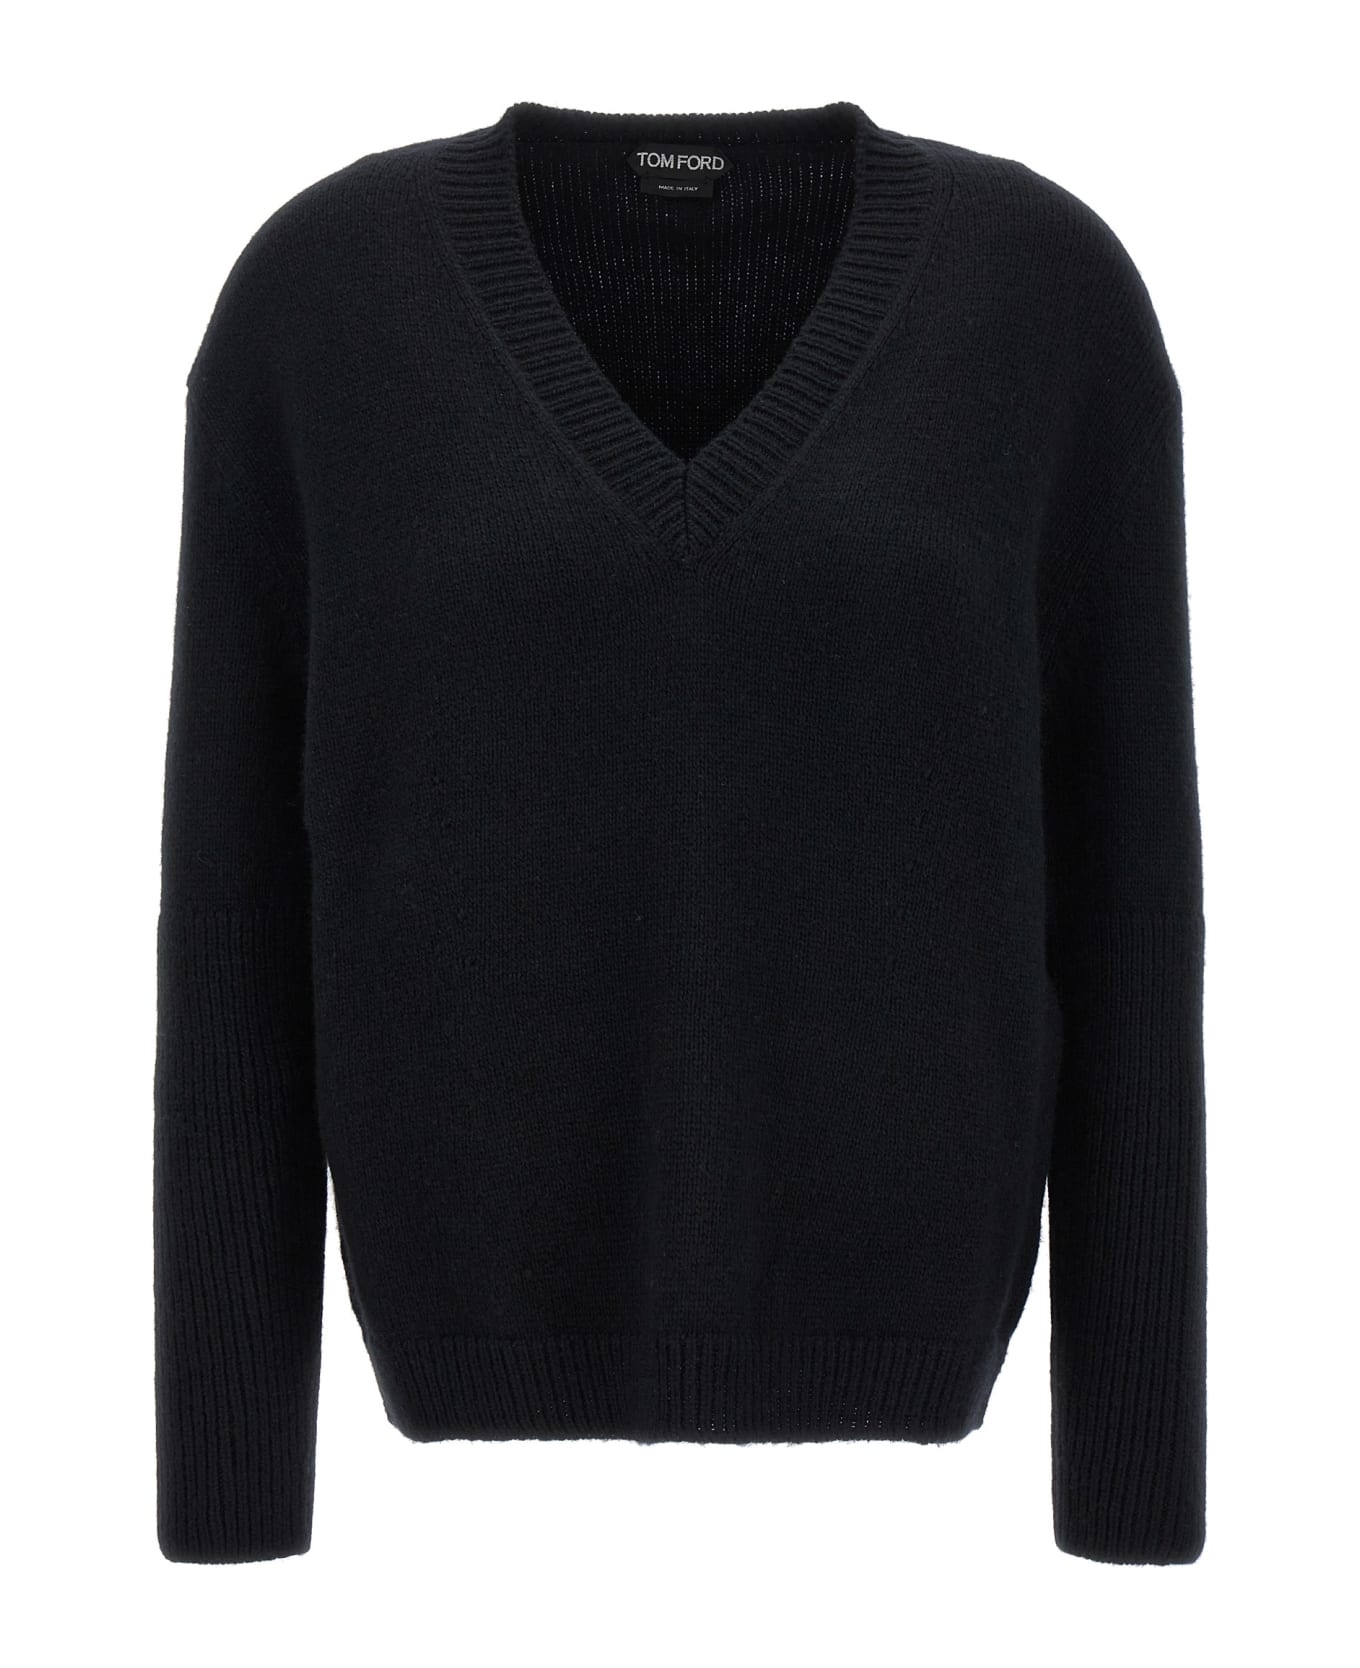 Tom Ford Mixed Cachemire Sweater - Black